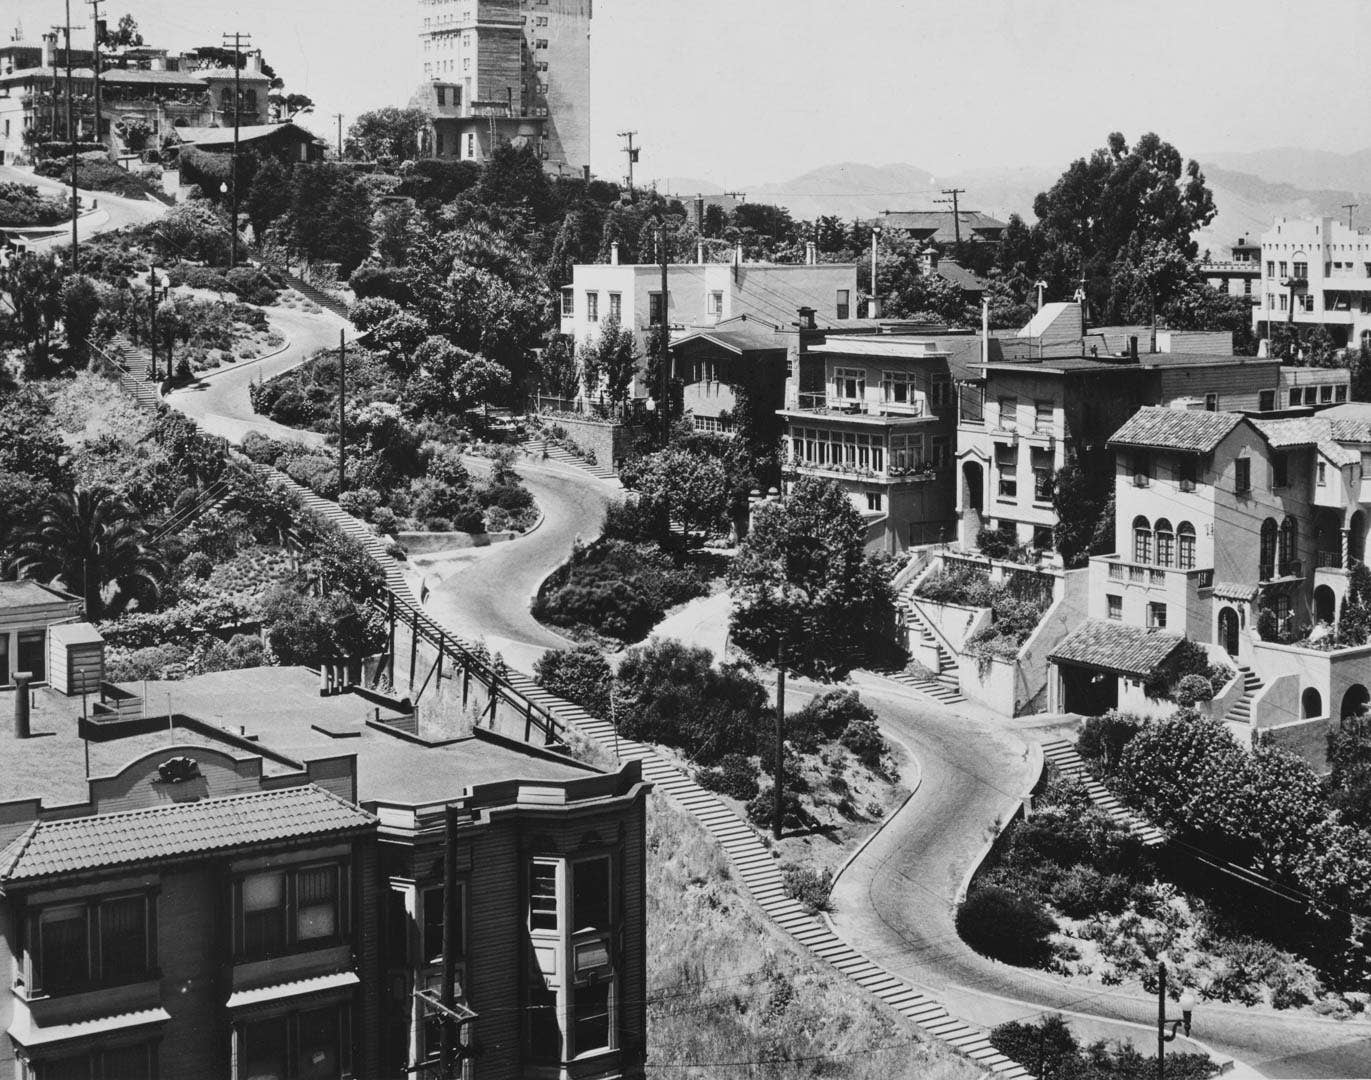 Properties along Lombard Street, labeled 'the crookedest street in the world,' a steep, one-block section with eight hairpin bends, running east to west in the Russian Hill neighborhood of San Francisco circa 1945. (Photo by UPI/Bettmann Archive via Getty Images)